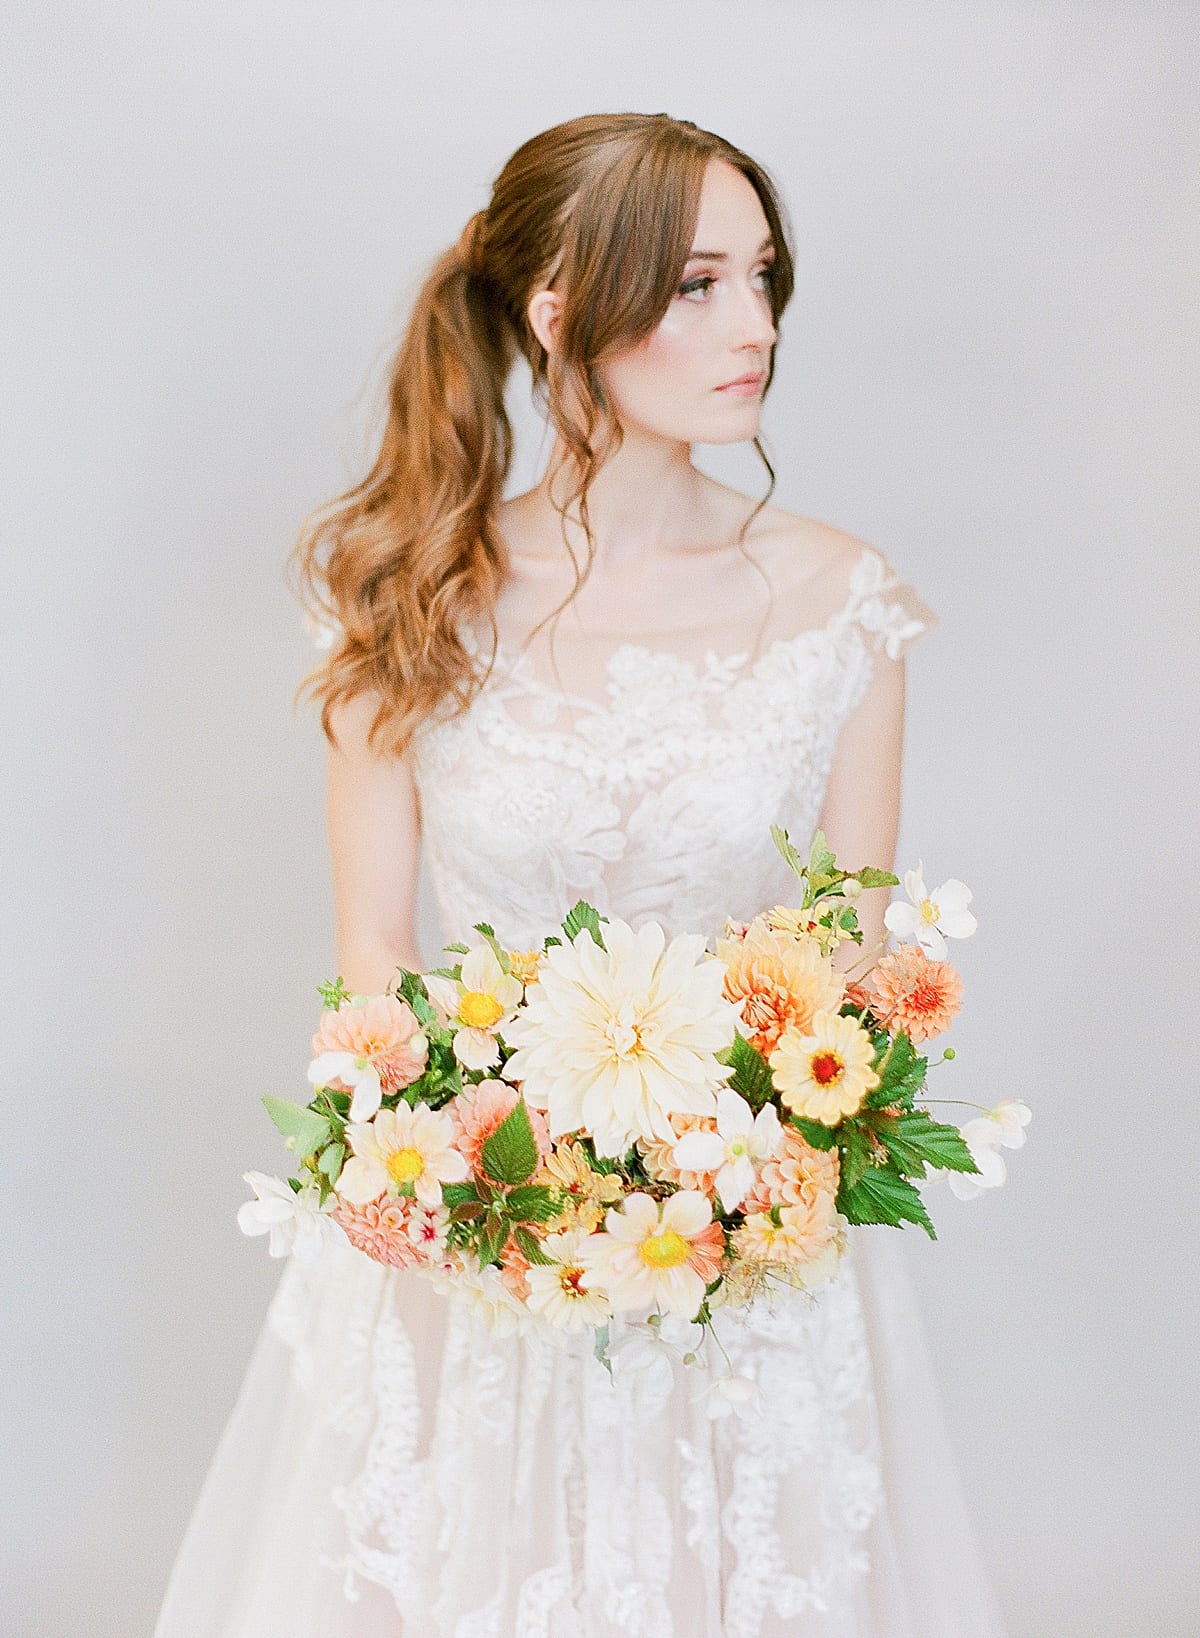 Wedding Hair and Makeup Bride Holding Bouquet with Ponytail Photo